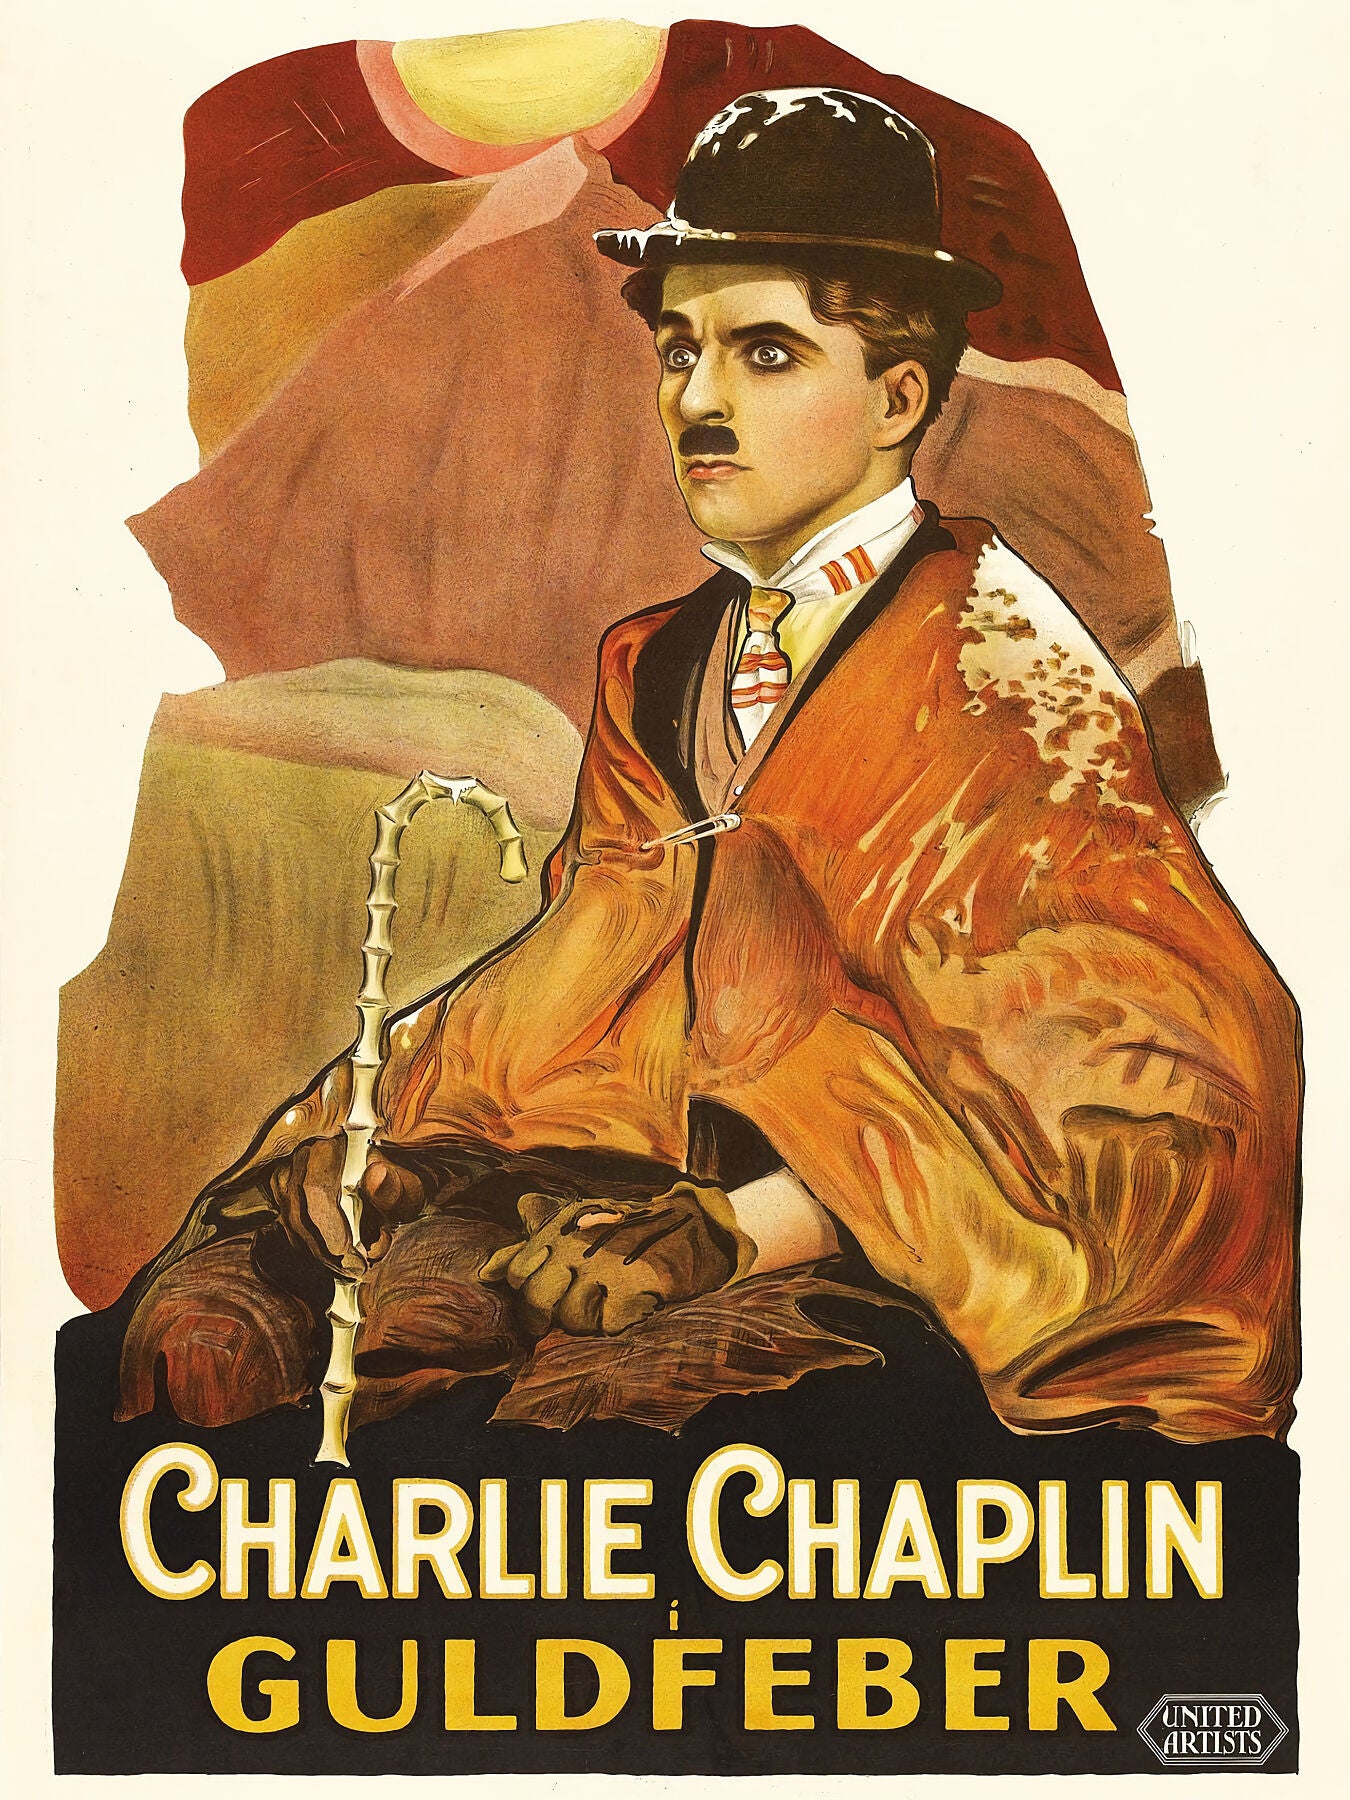 Poster featuring Charlie Chaplin Guldfeber (The Gold Rush) - a 1925 American comedy film written, produced, and directed by Charlie Chaplin.